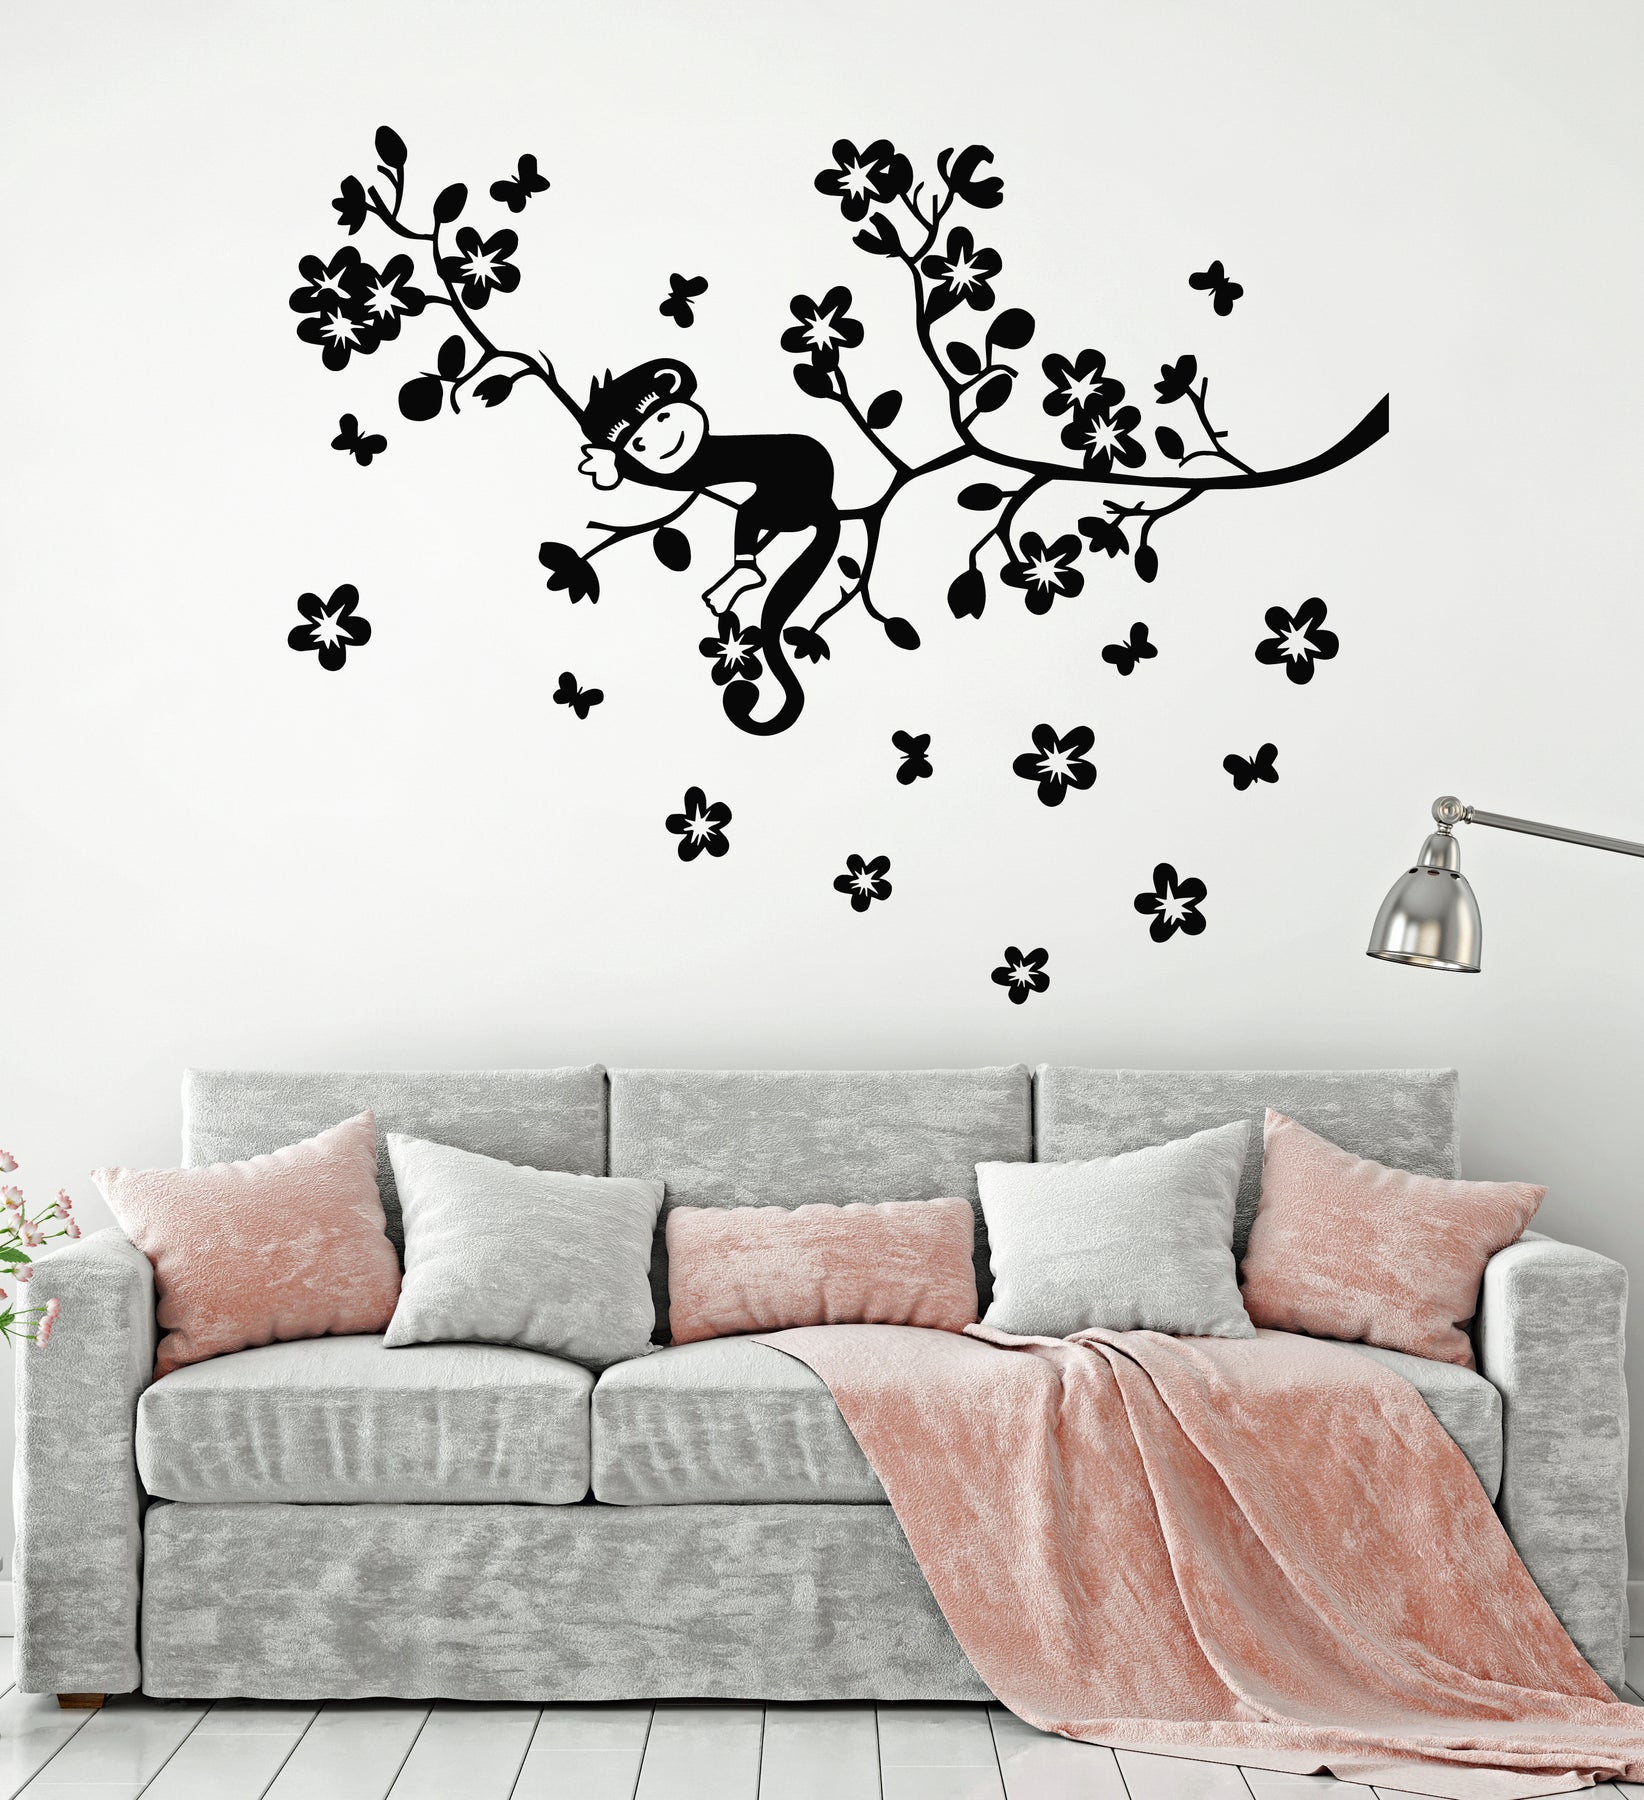 Corner Tree - Monkey wall decal with Customized Name-Vinyl Blossom Tree  Wall Decal And Blossom Tree